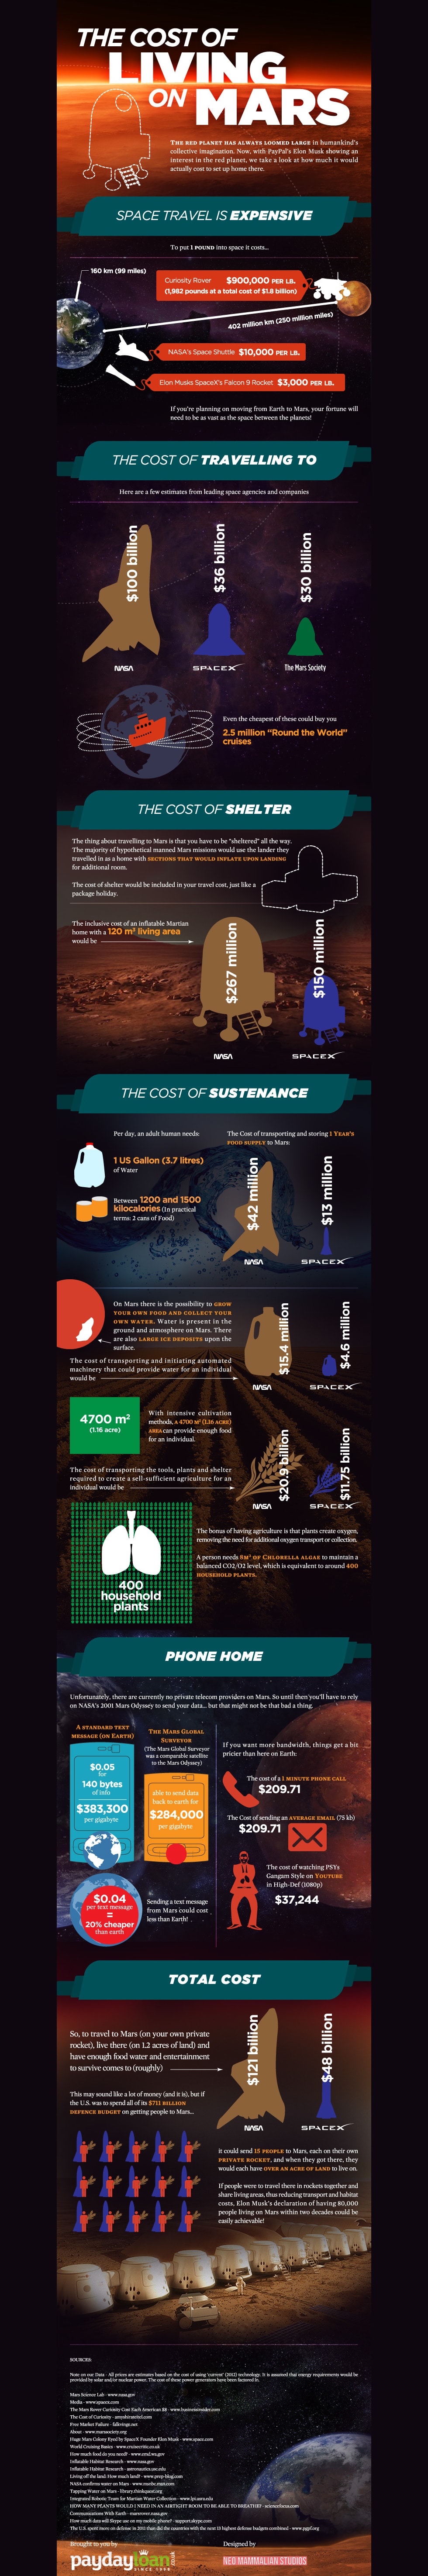 How Much Money Would It Cost For You To Live On Mars? [Infographic]